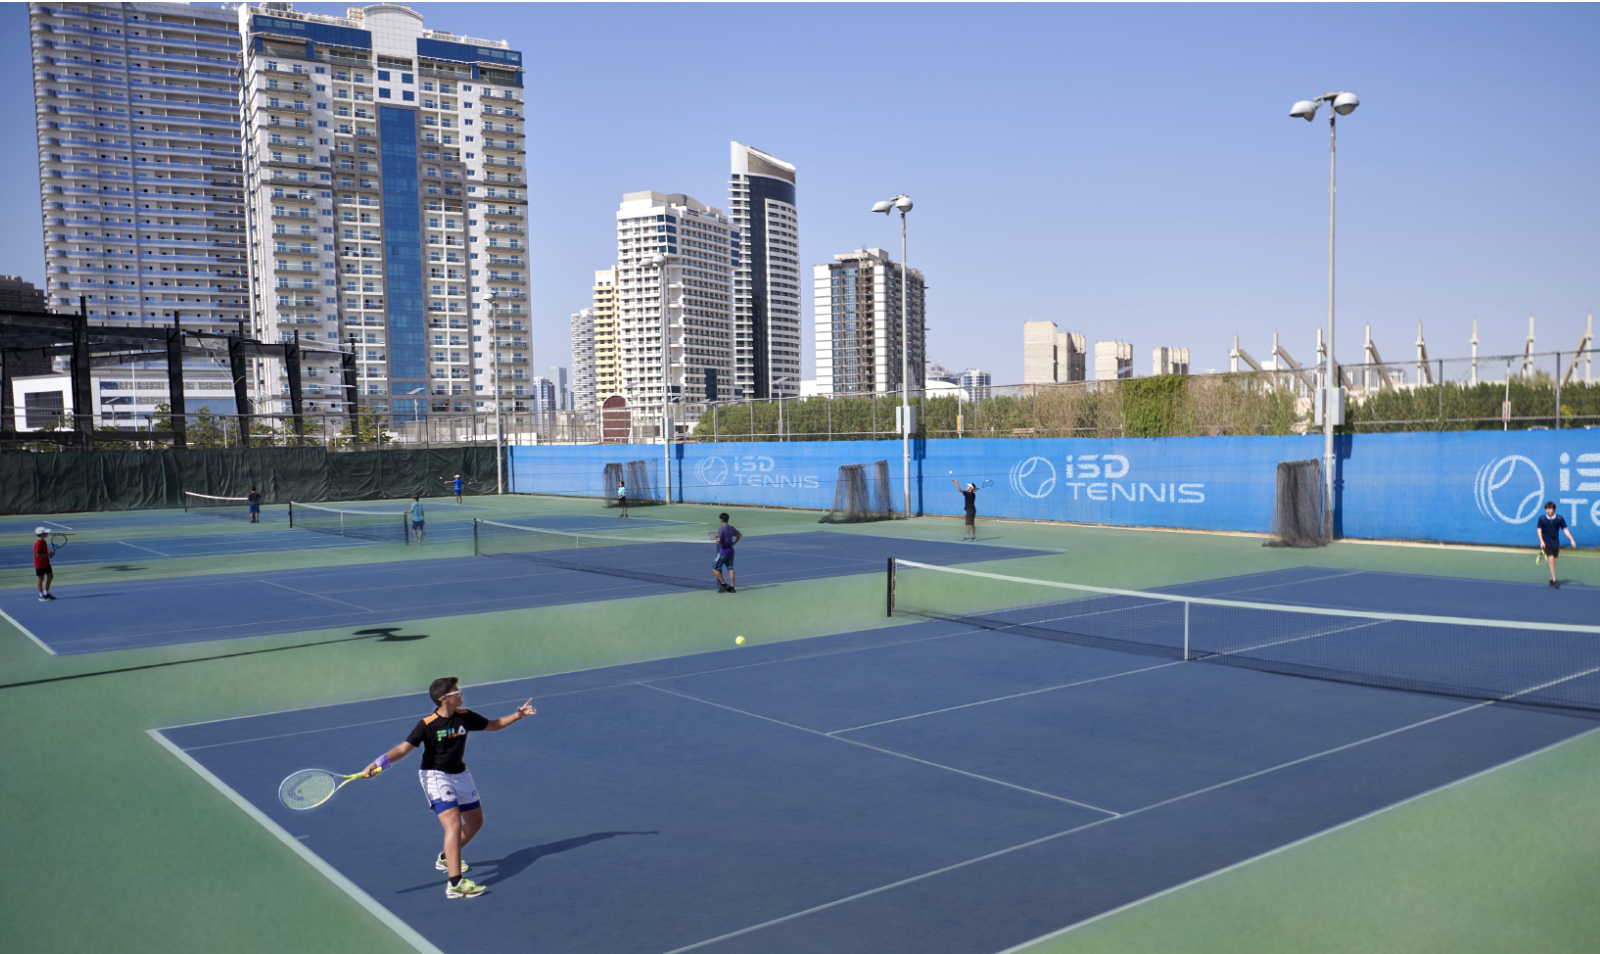 A young tennis player playing a practice match at ISD Tennis Academy Dubai